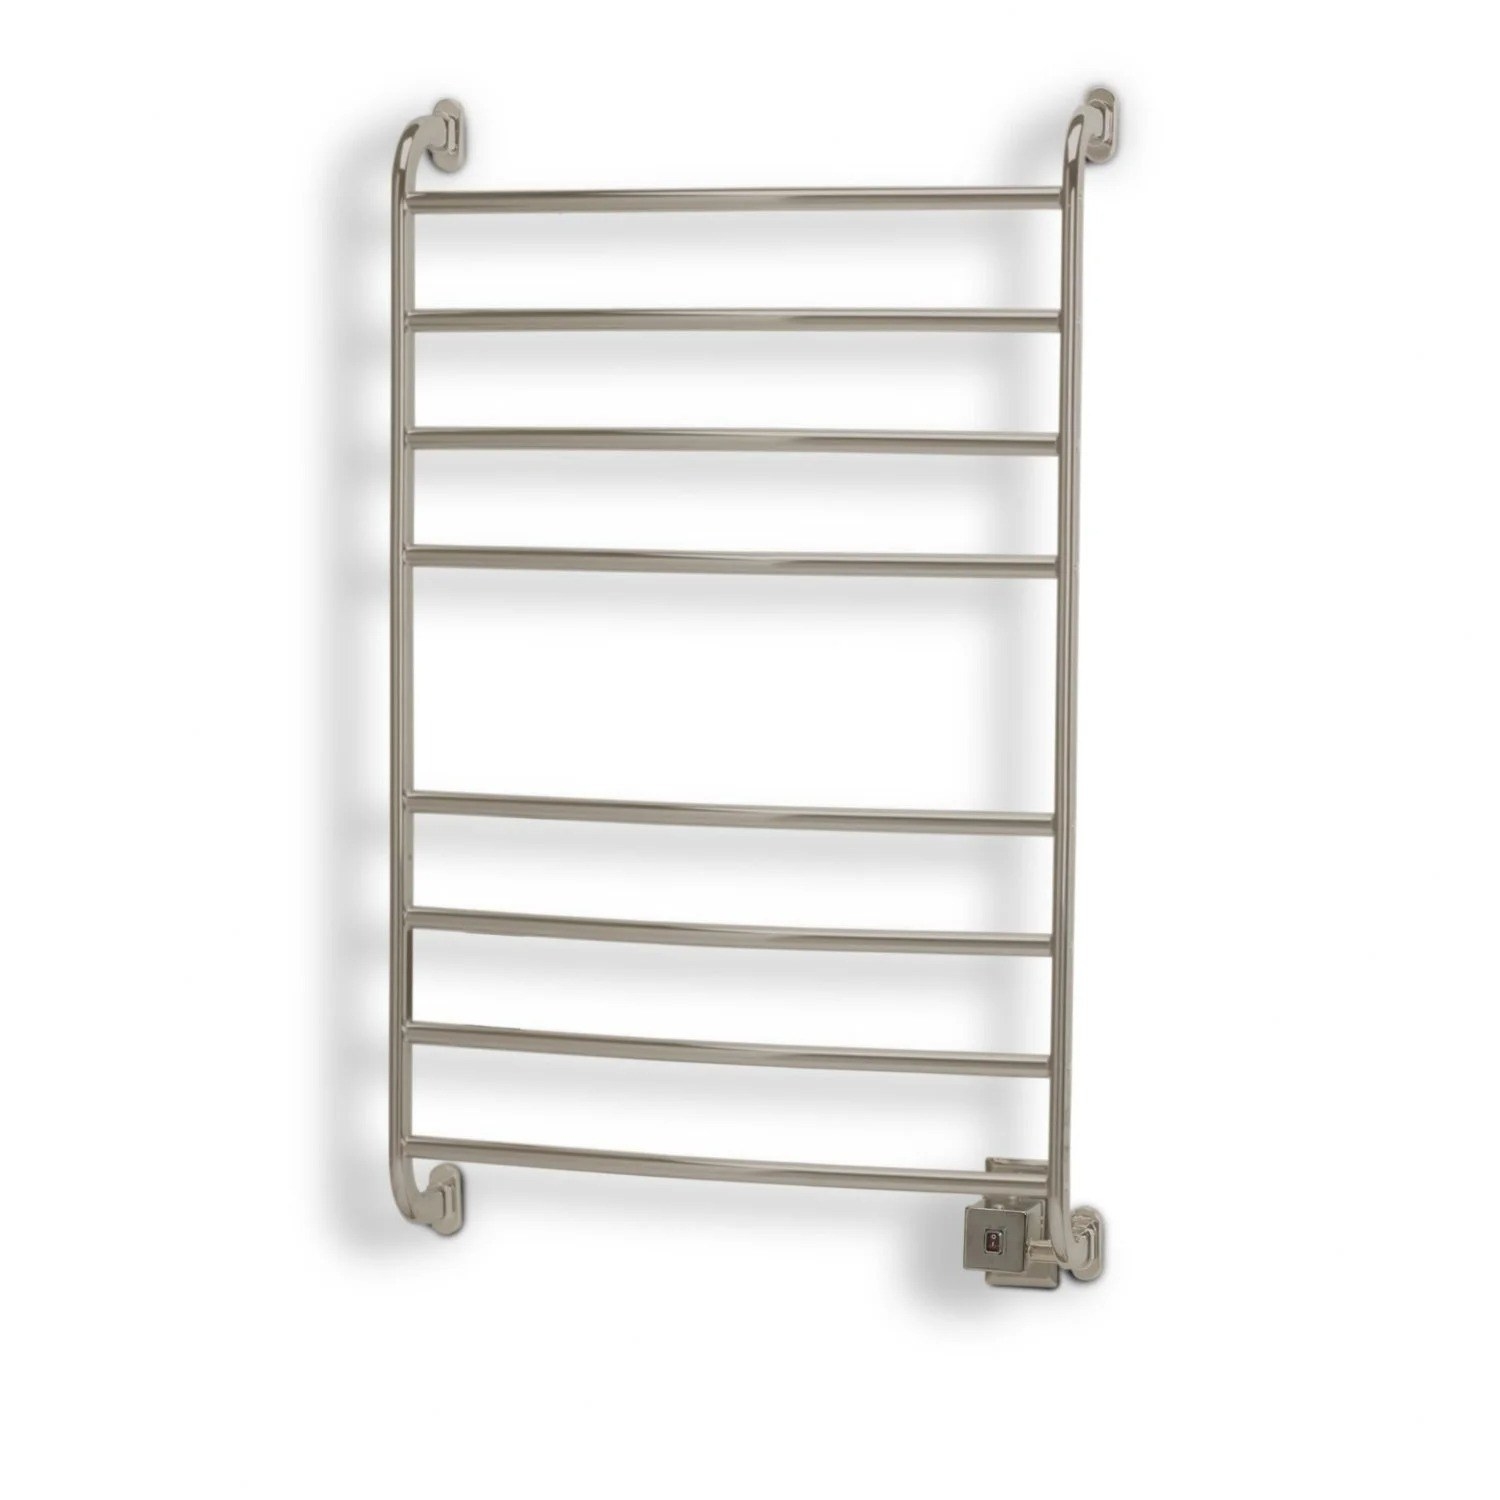 The towel warmer with several rungs